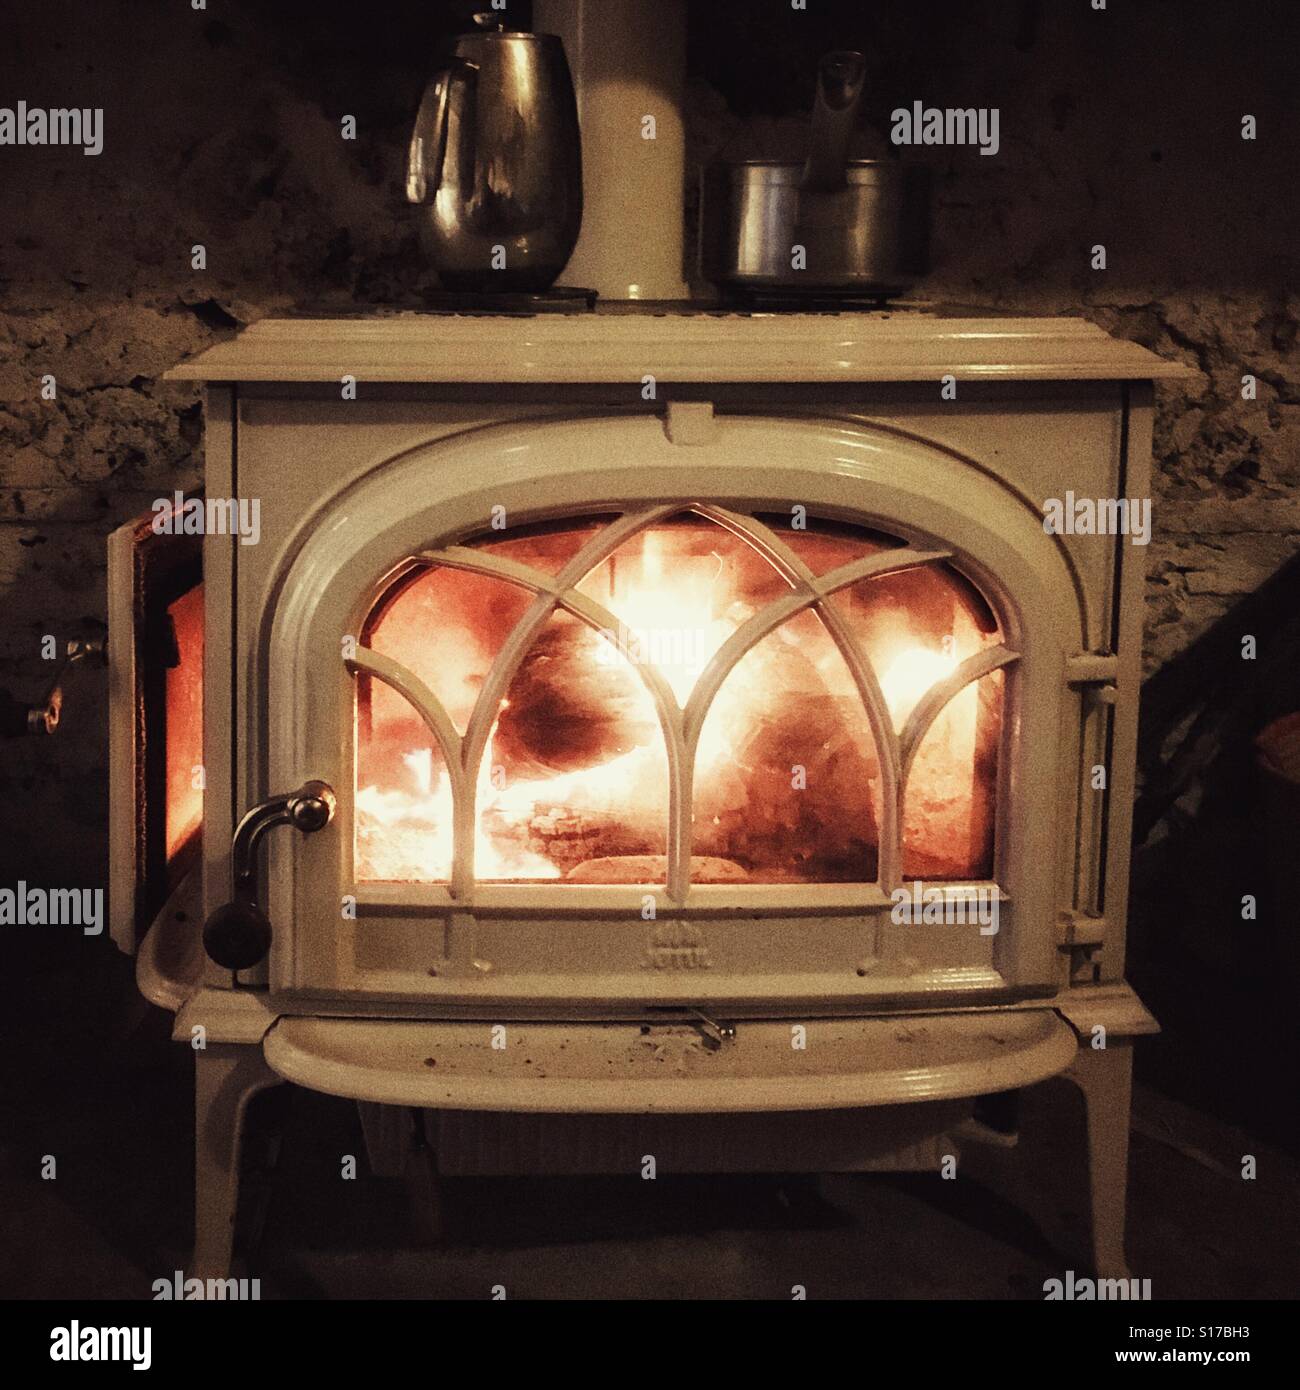 https://c8.alamy.com/comp/S17BH3/morning-fire-warms-this-old-french-kitchen-nothing-like-a-glowing-S17BH3.jpg